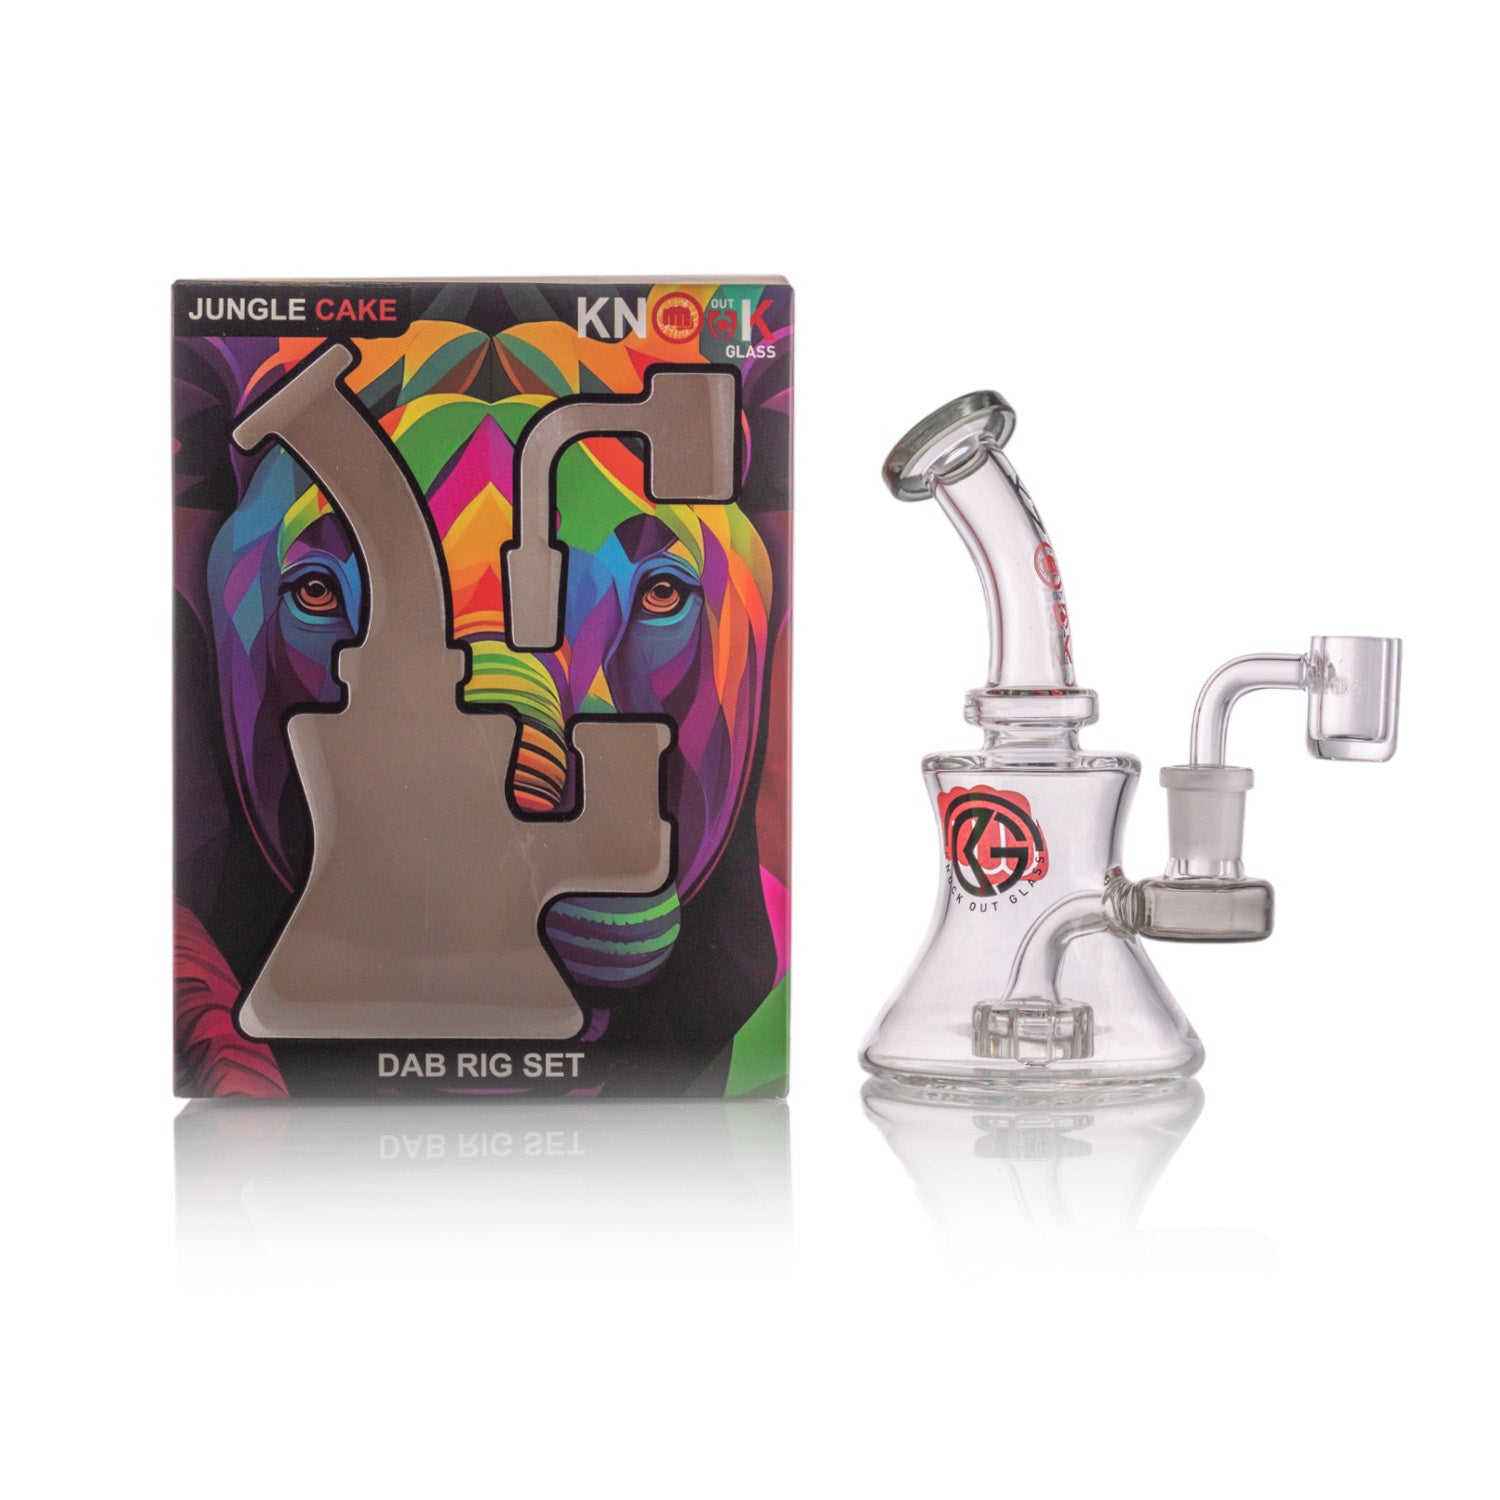 Knock Out Glass Jungle Cake 6 inch Rig Set